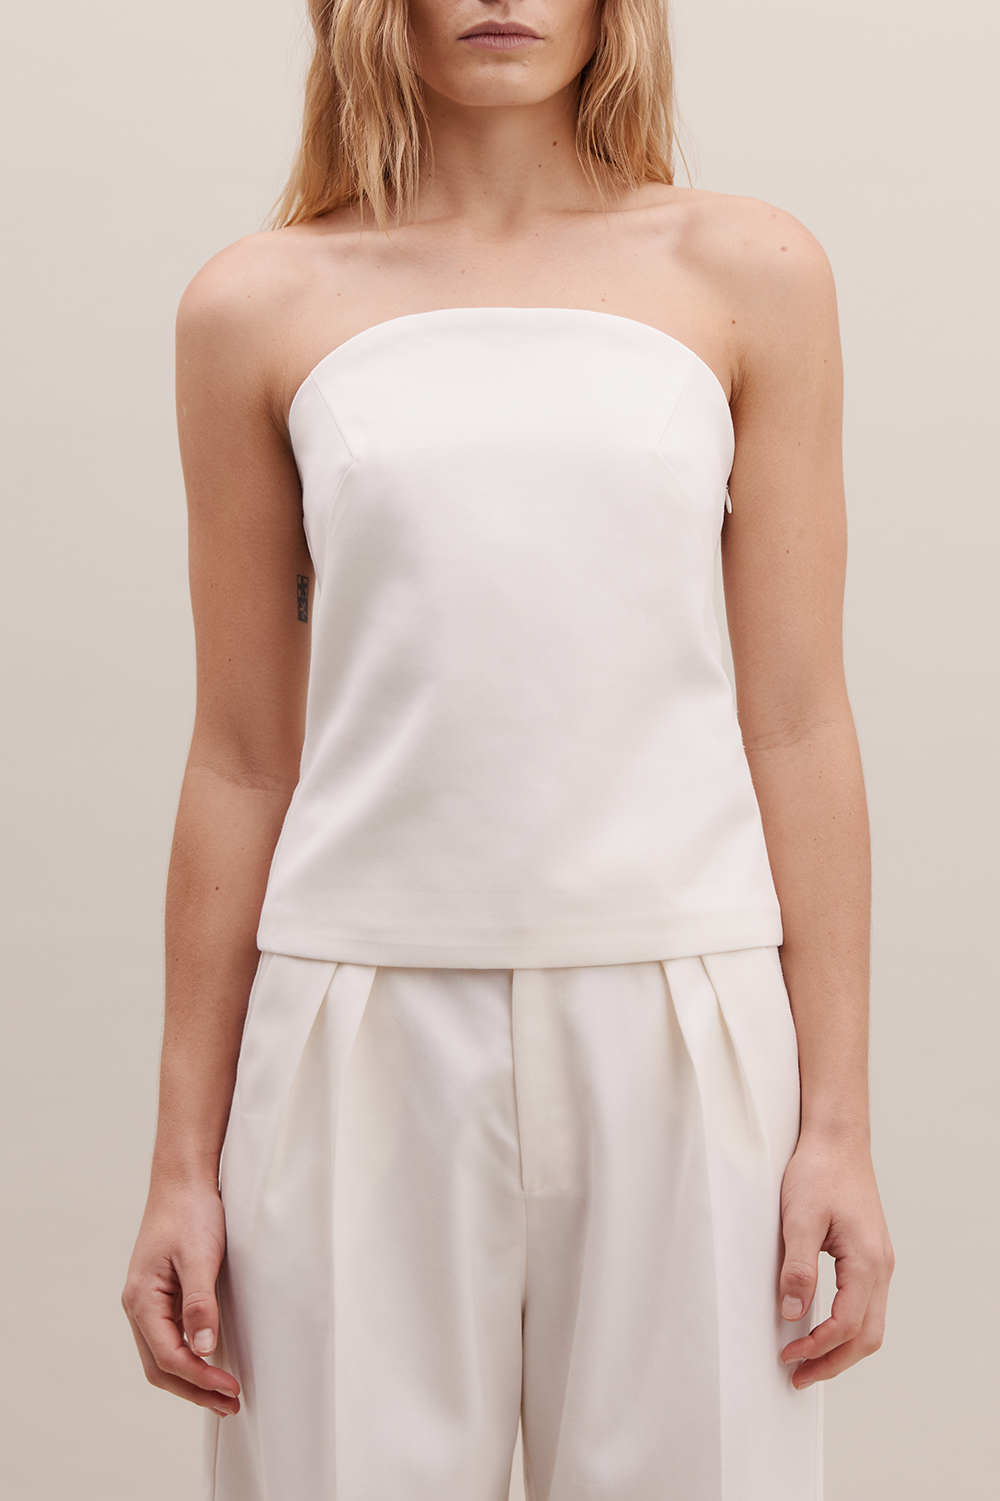 REBE - STRAPLESS TOP IVORY WAS $295